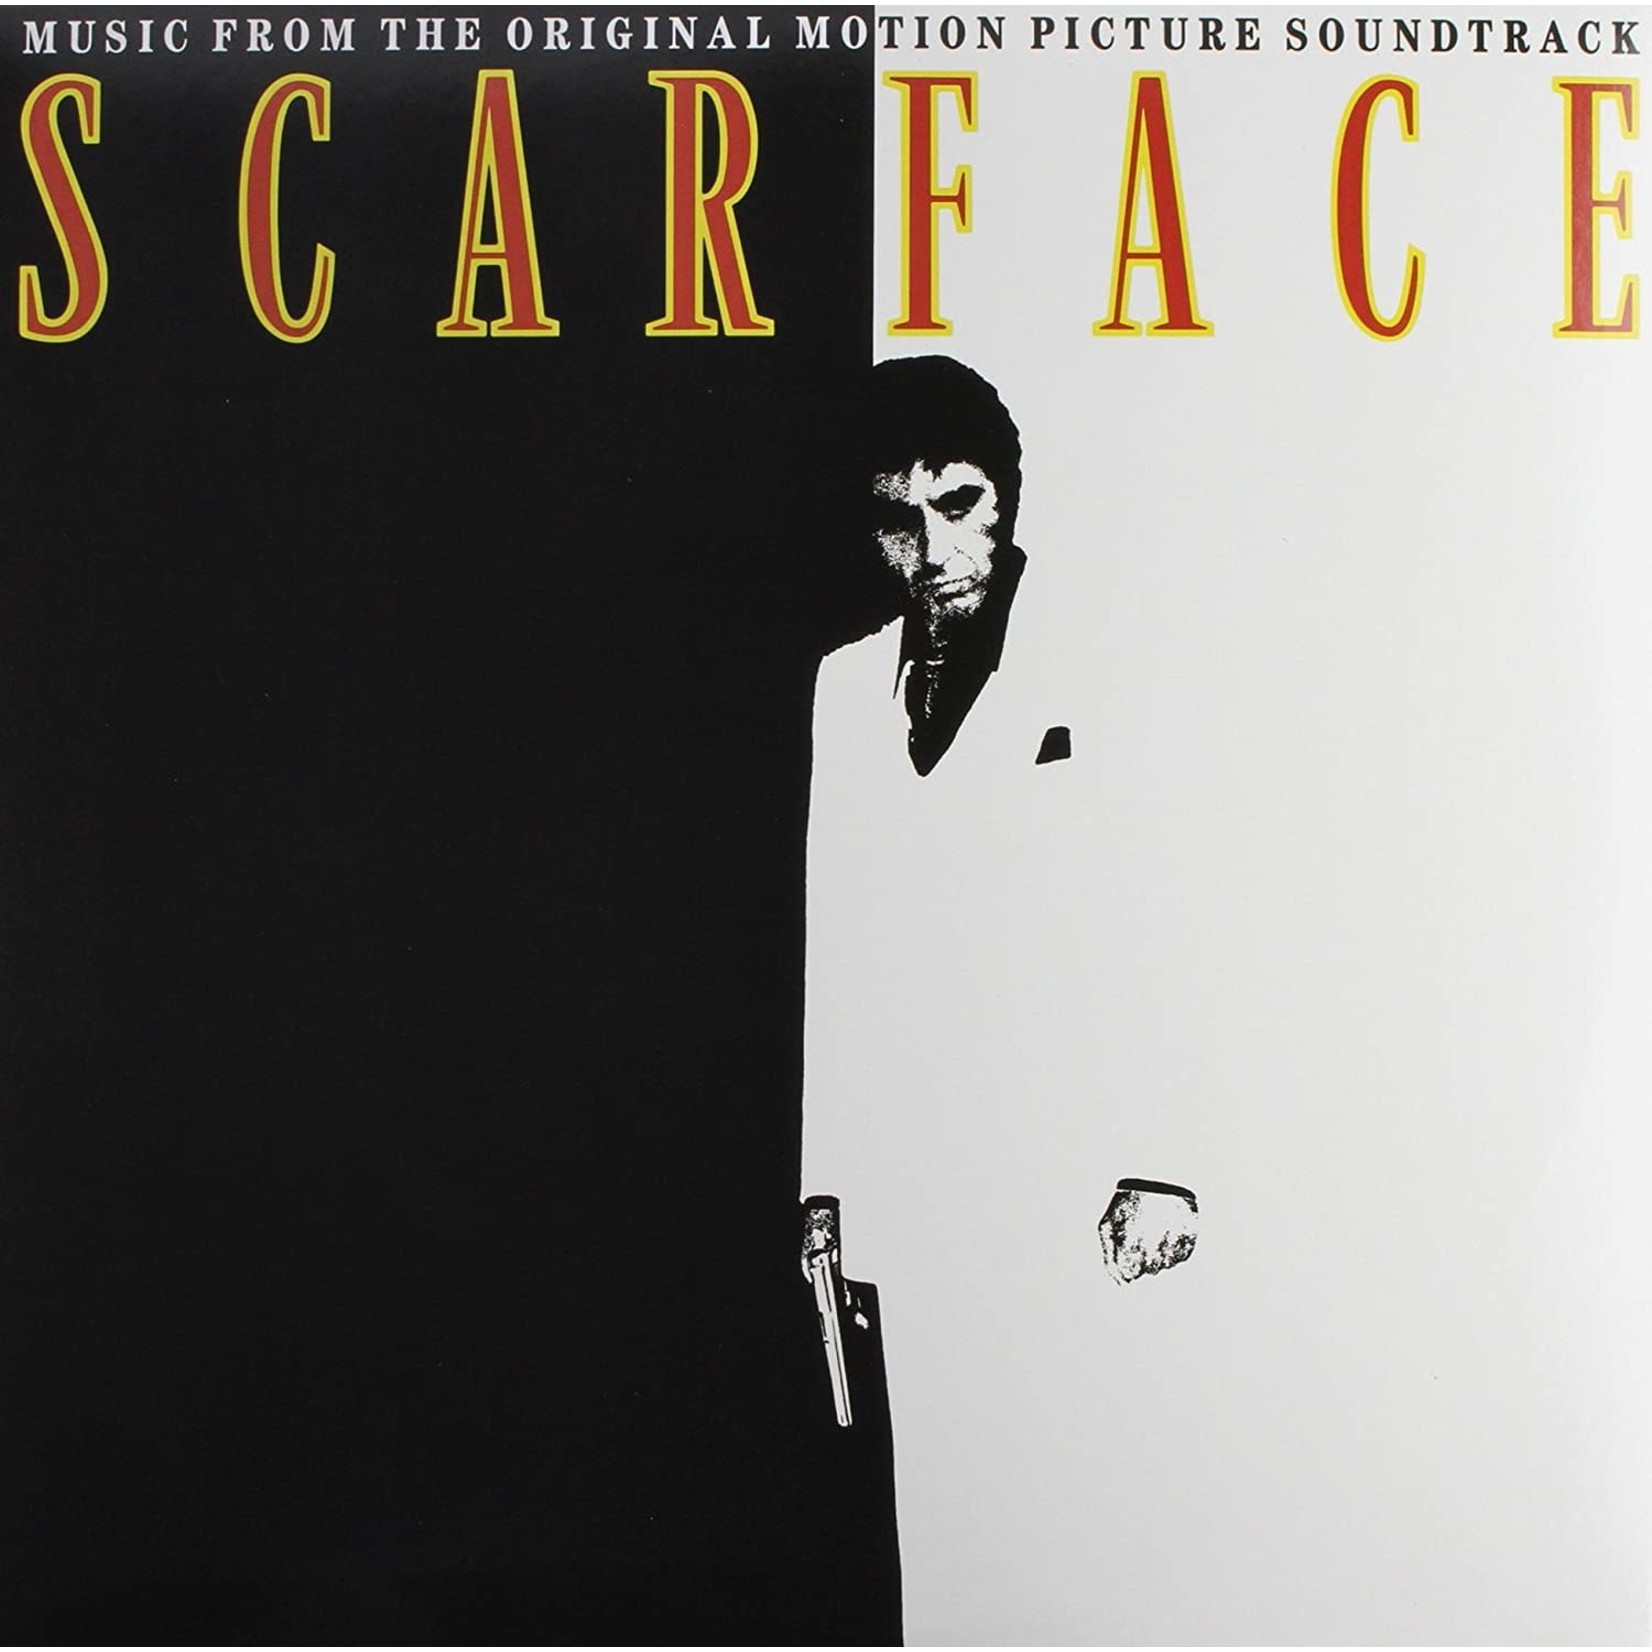 [New] Various Artists - Scarface (soundtrack)